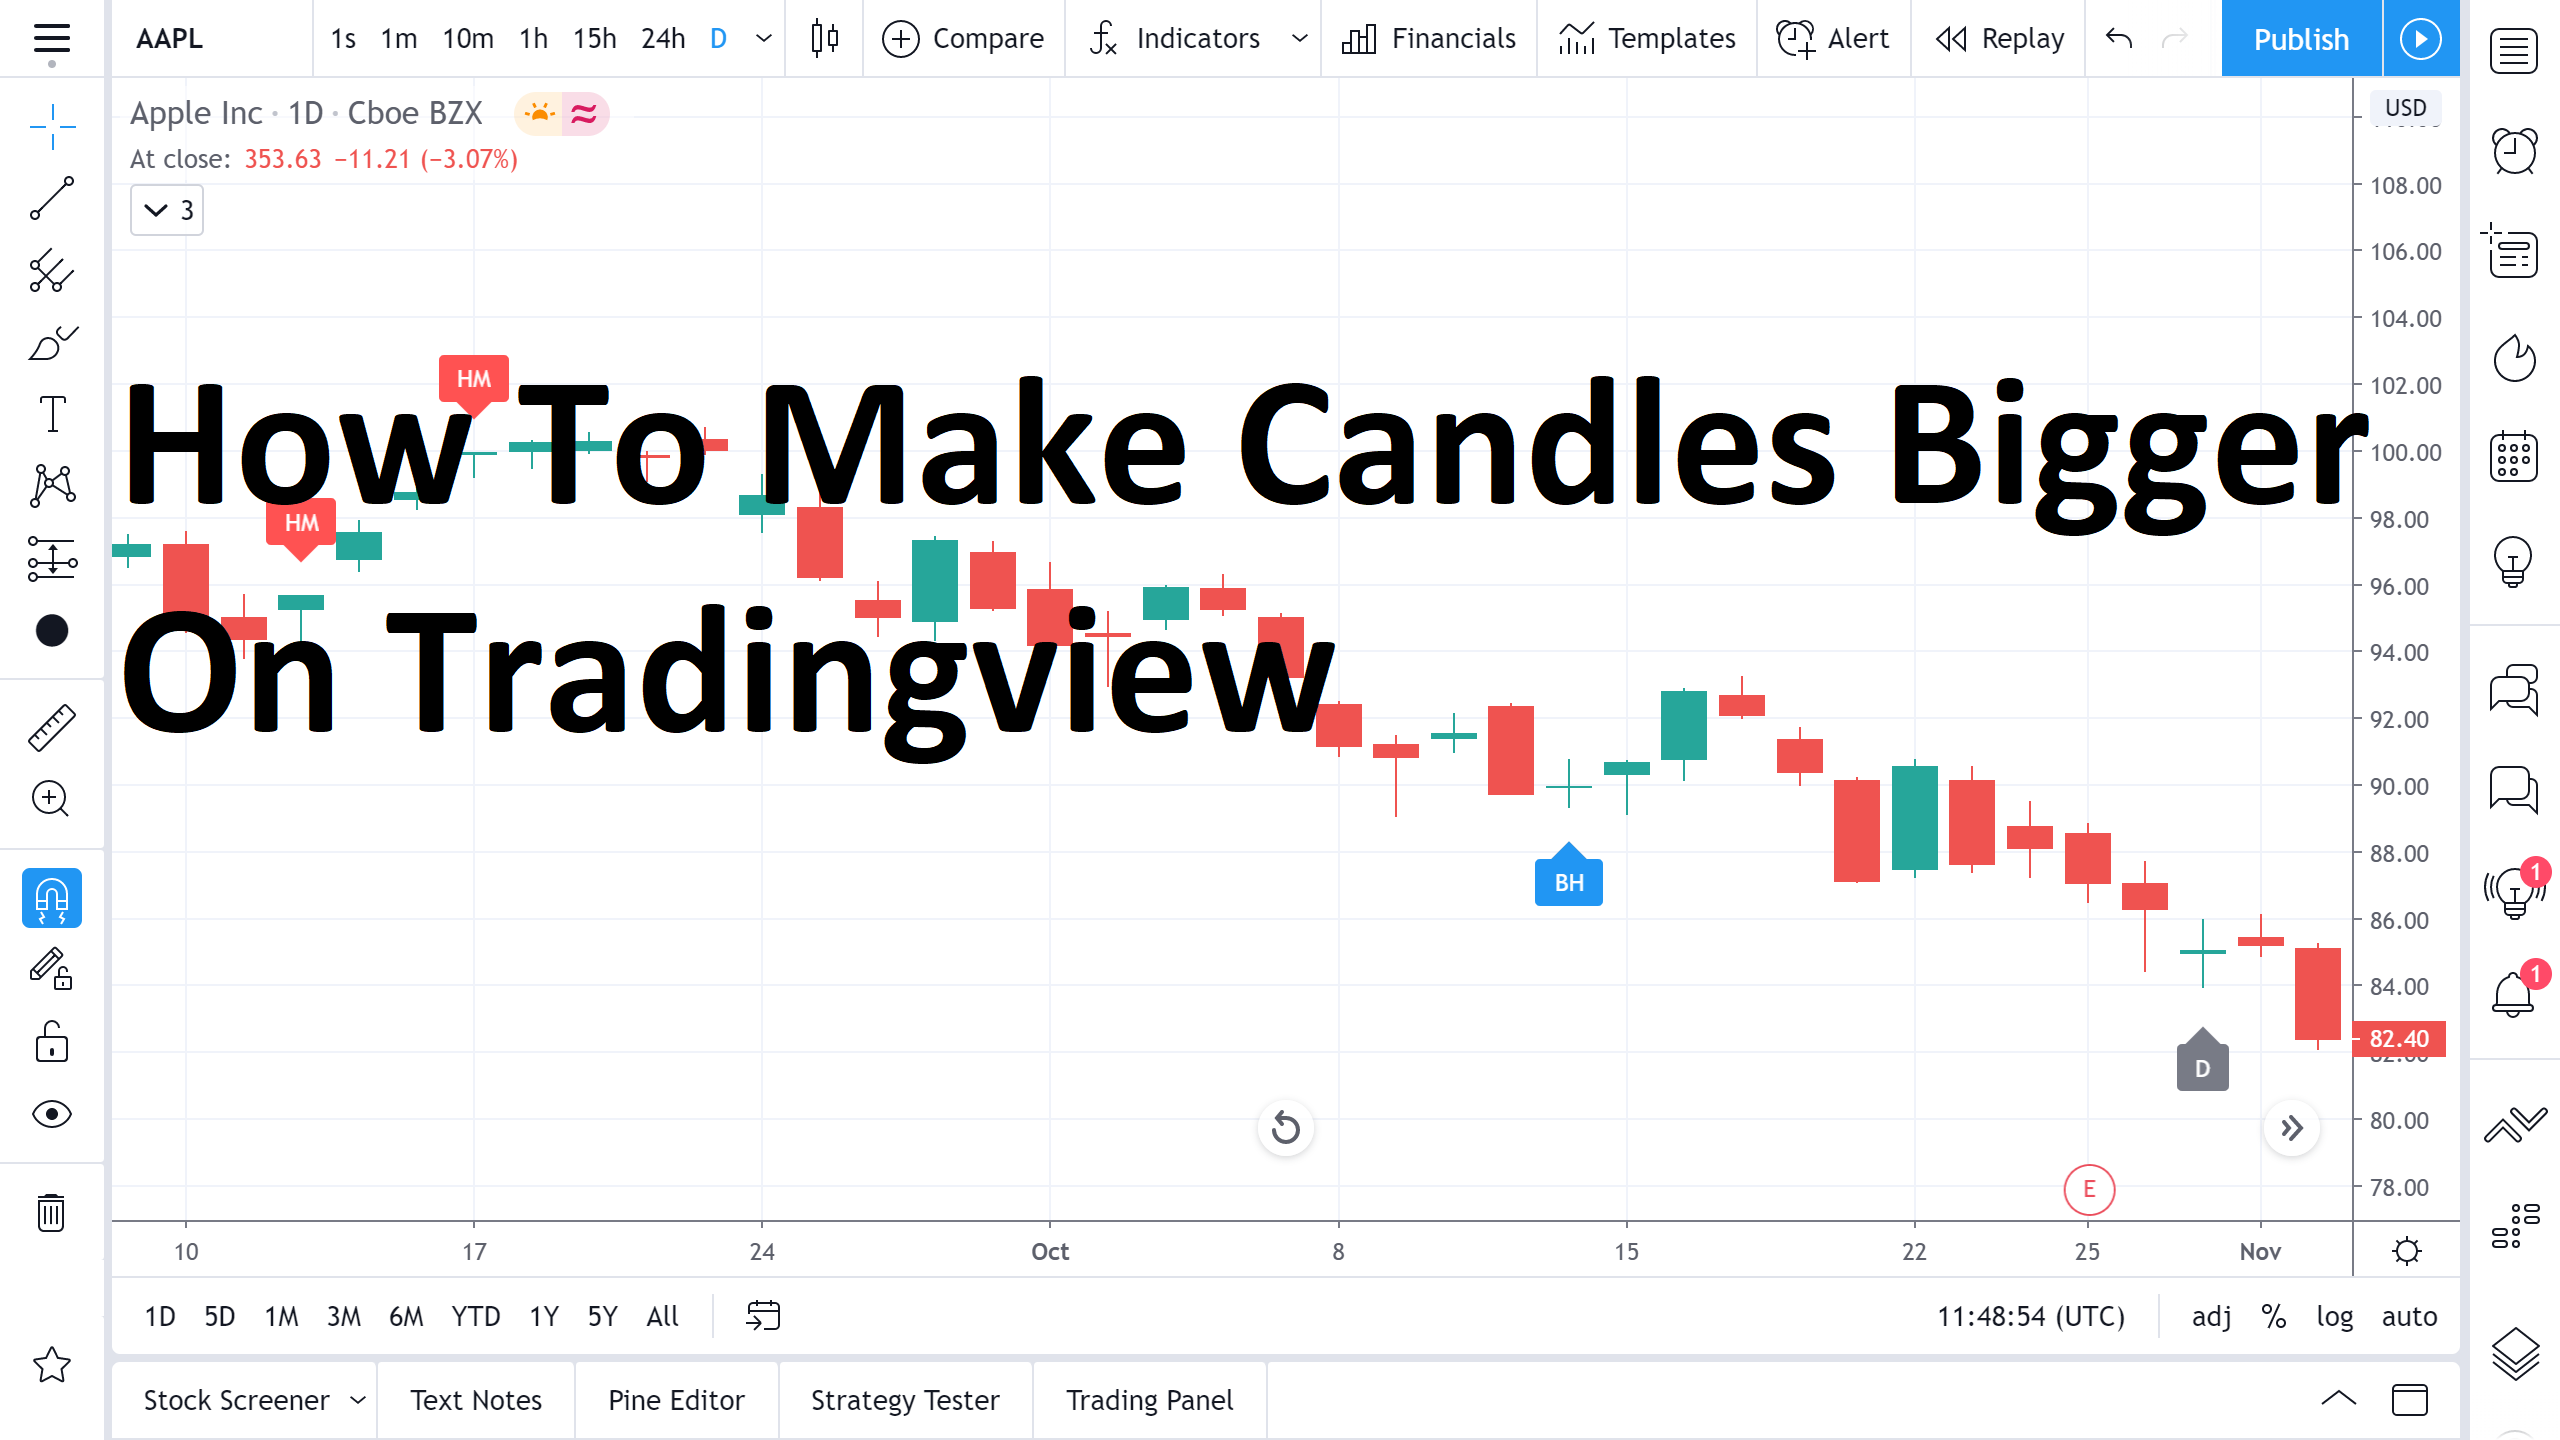 How To Make Candles Bigger On Tradingview